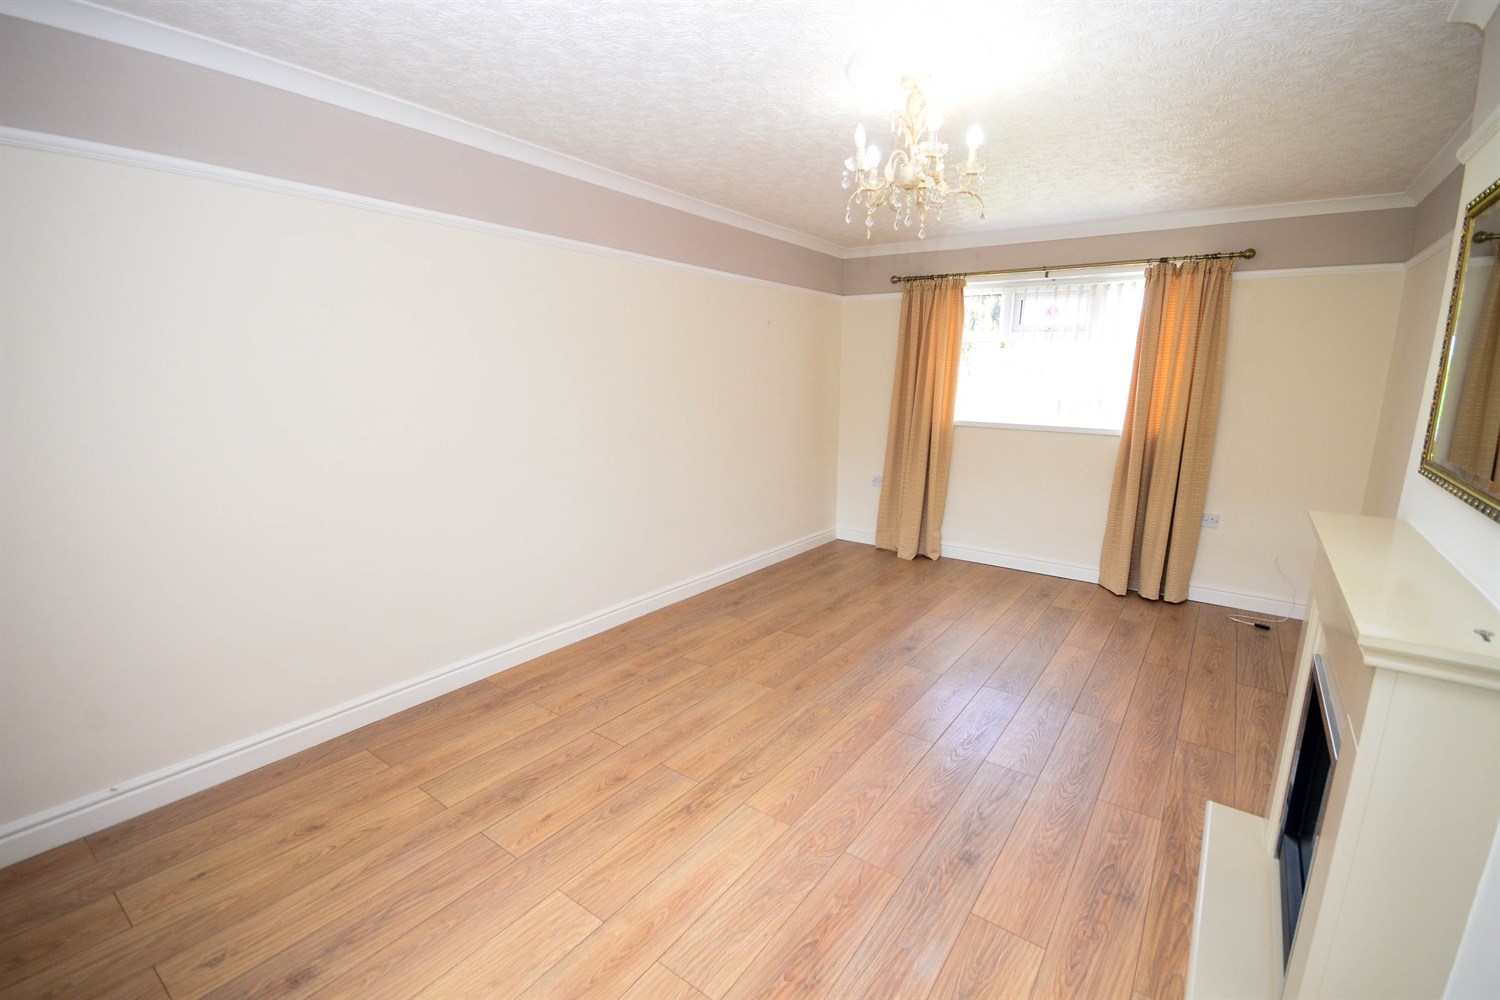 3 bed semi-detached house for sale in Chilcrosse, Leam Lane  - Property Image 5